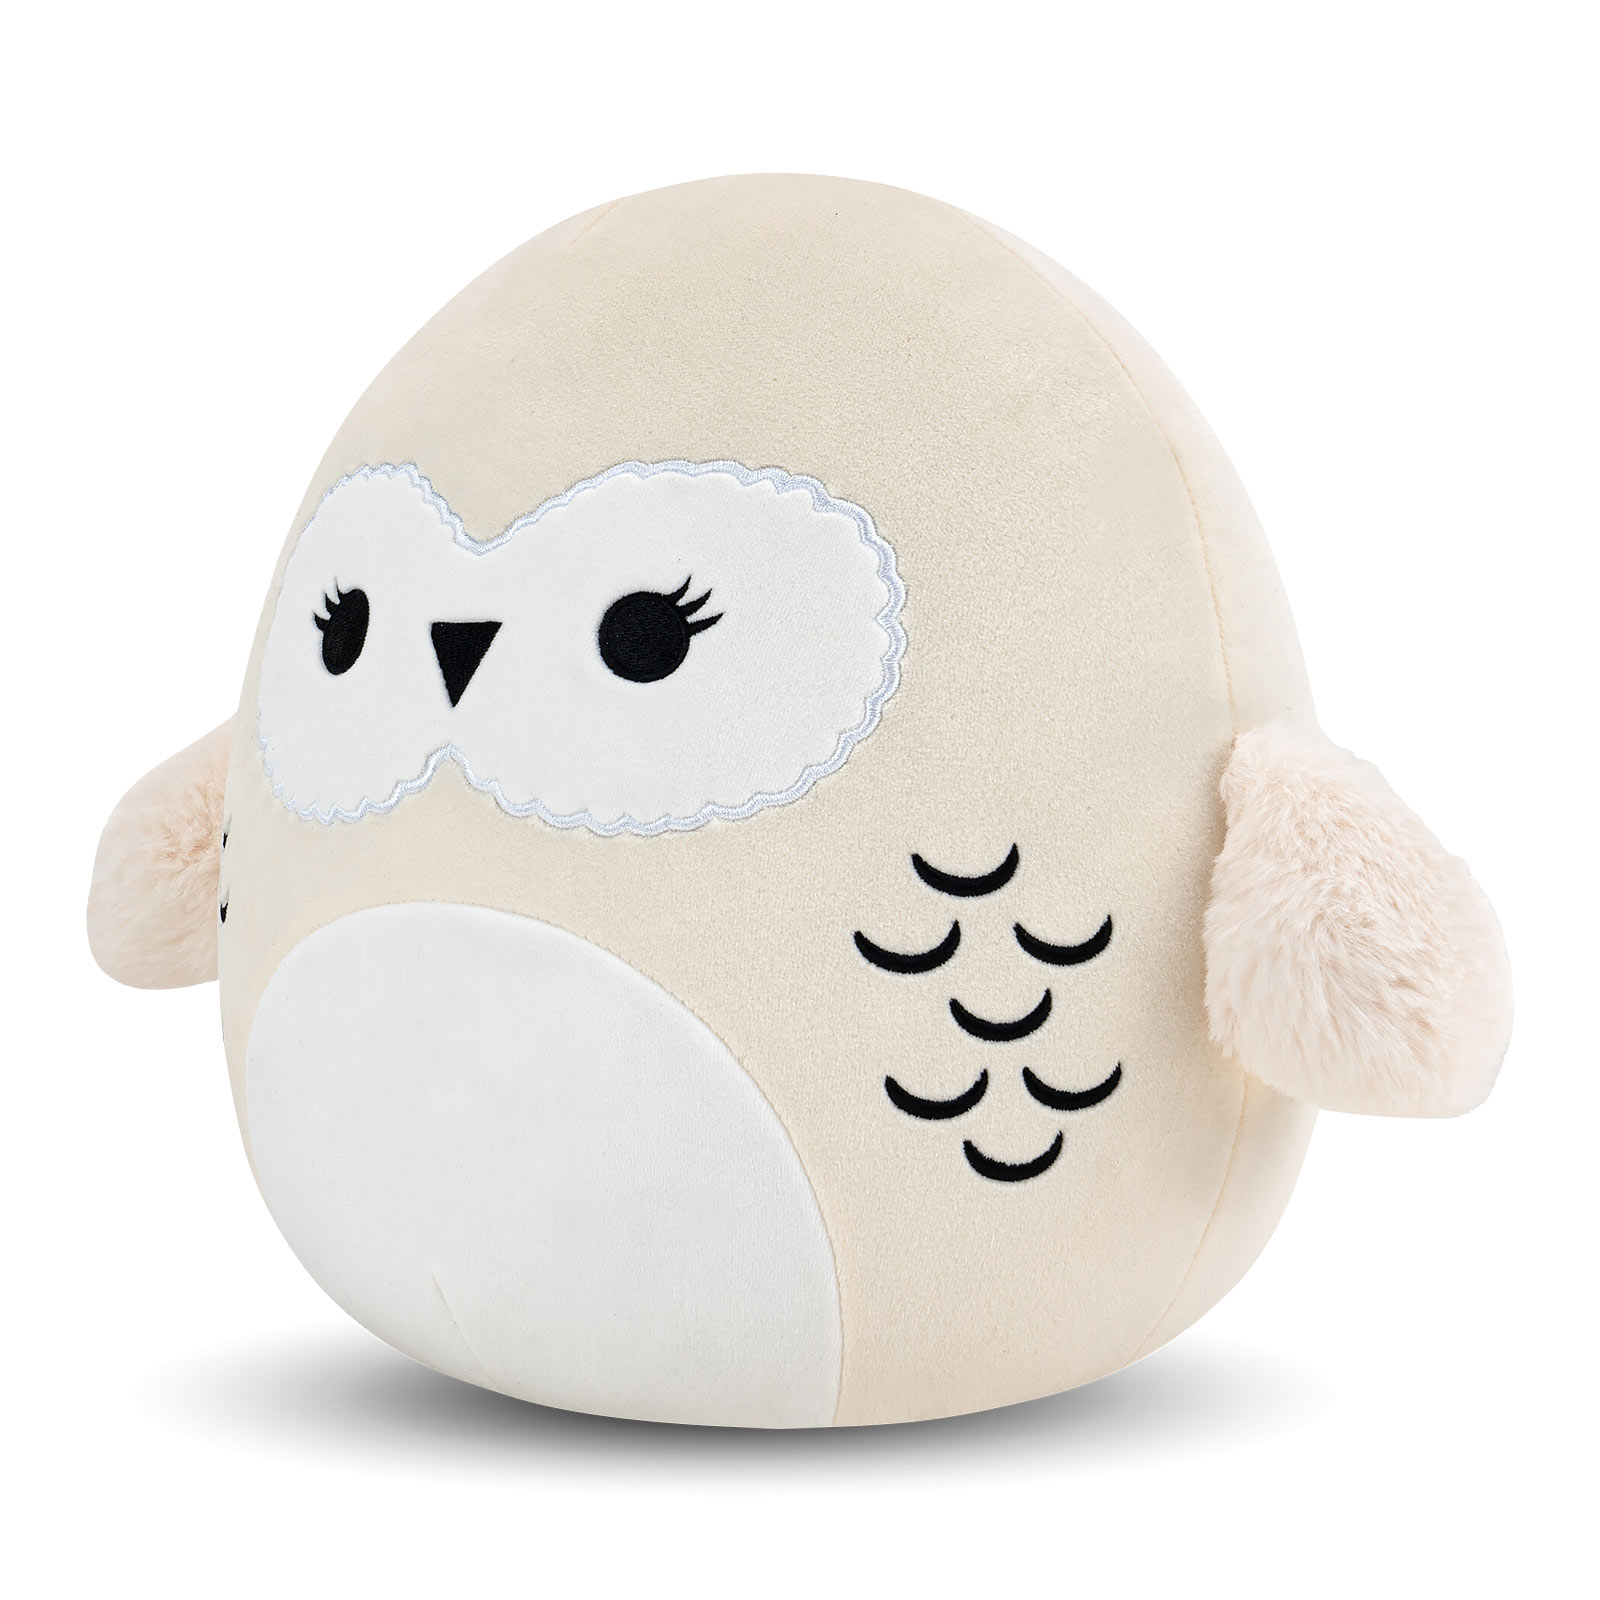 Hedwig Squishmallows Plush Figure - Harry Potter